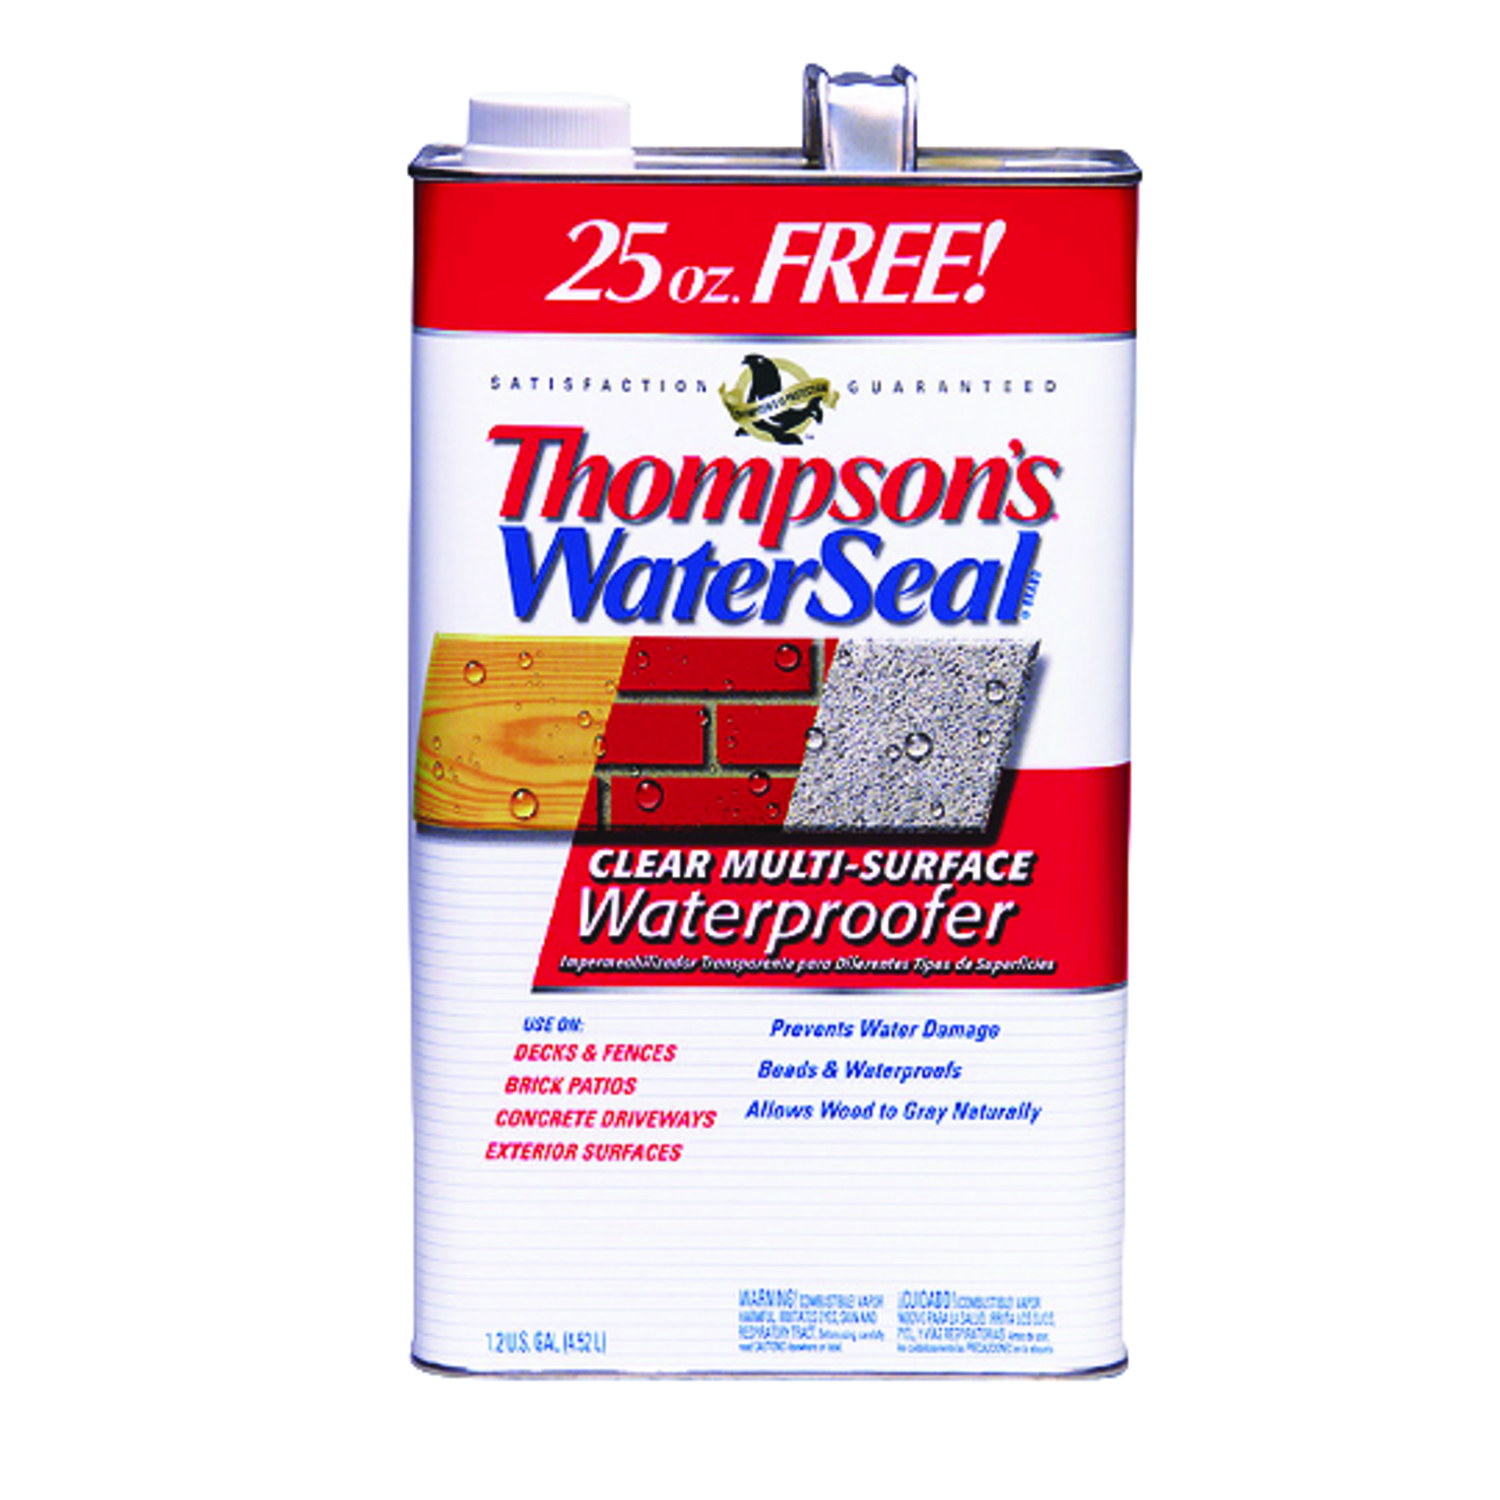 UPC 032053241116 product image for Thompson's WaterSeal Multi-Surface Waterproofer - 4 Pack | upcitemdb.com